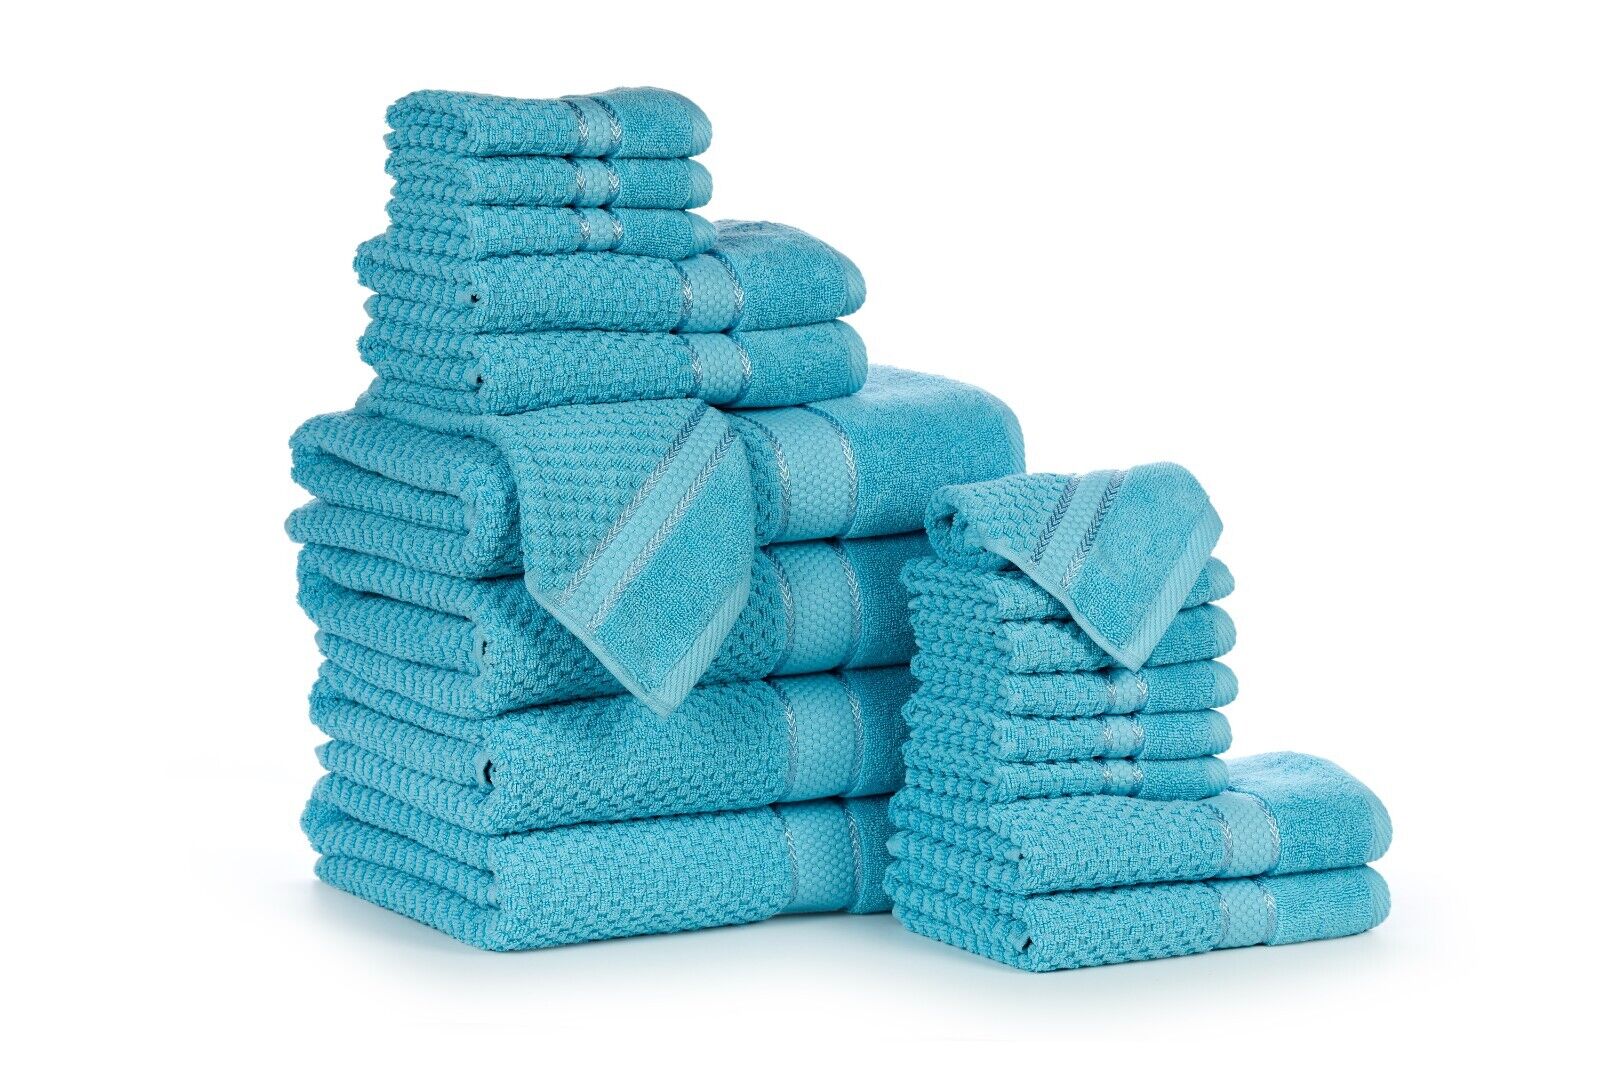 Ample Decor Bathroom Towel Set of 18 - Ideal for Gifting - Thick Ultra Absorbent